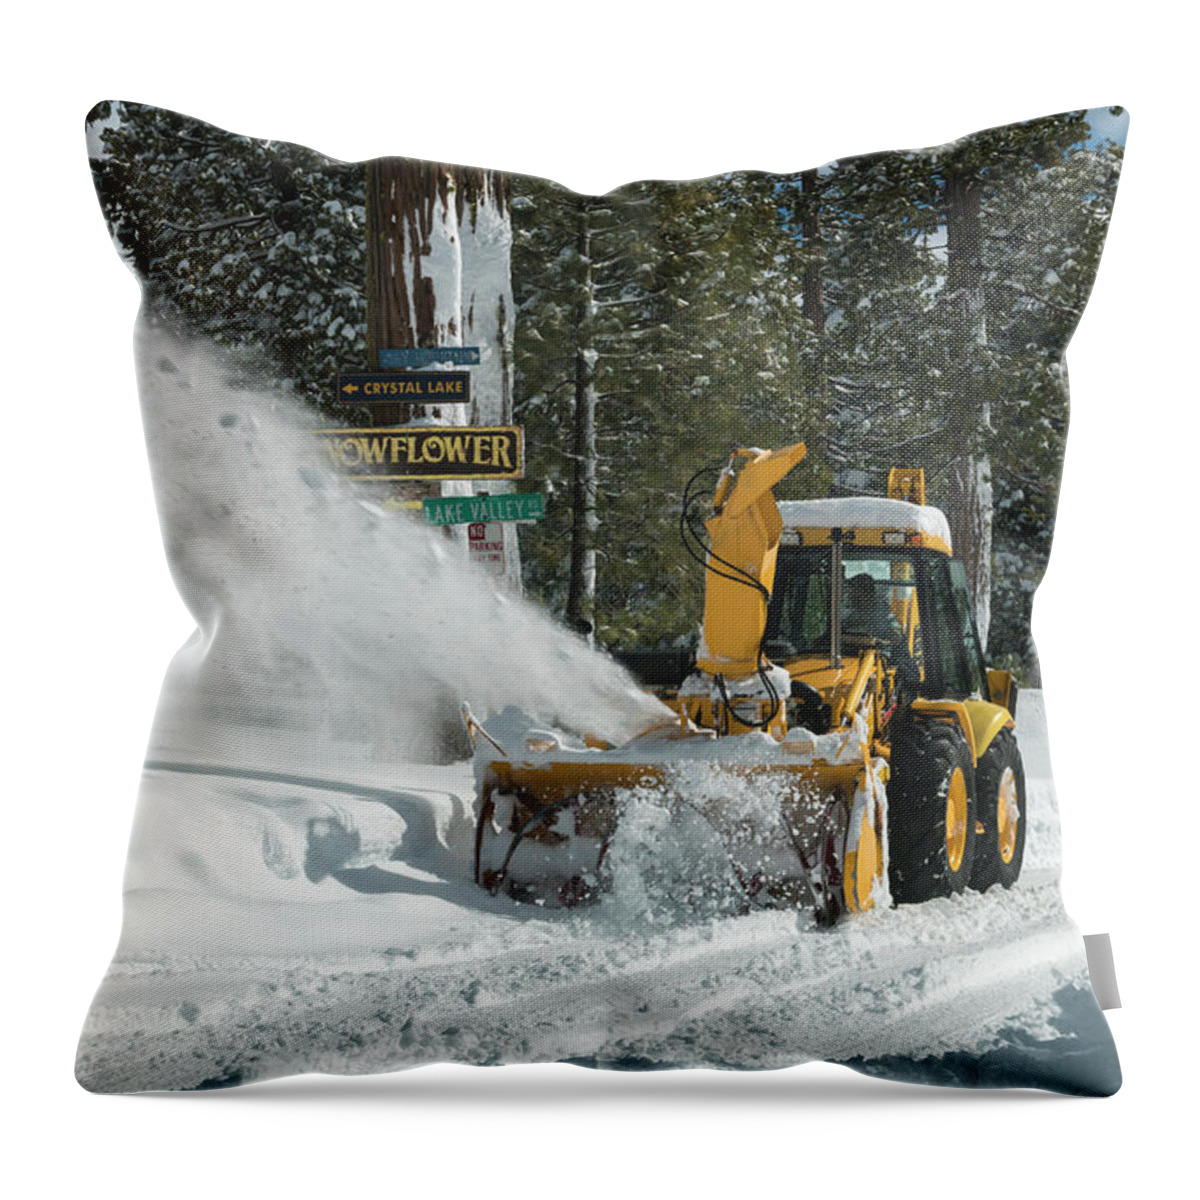 Sierra Nevada Mountains Throw Pillow featuring the photograph Snow Blowing by Jim Thompson